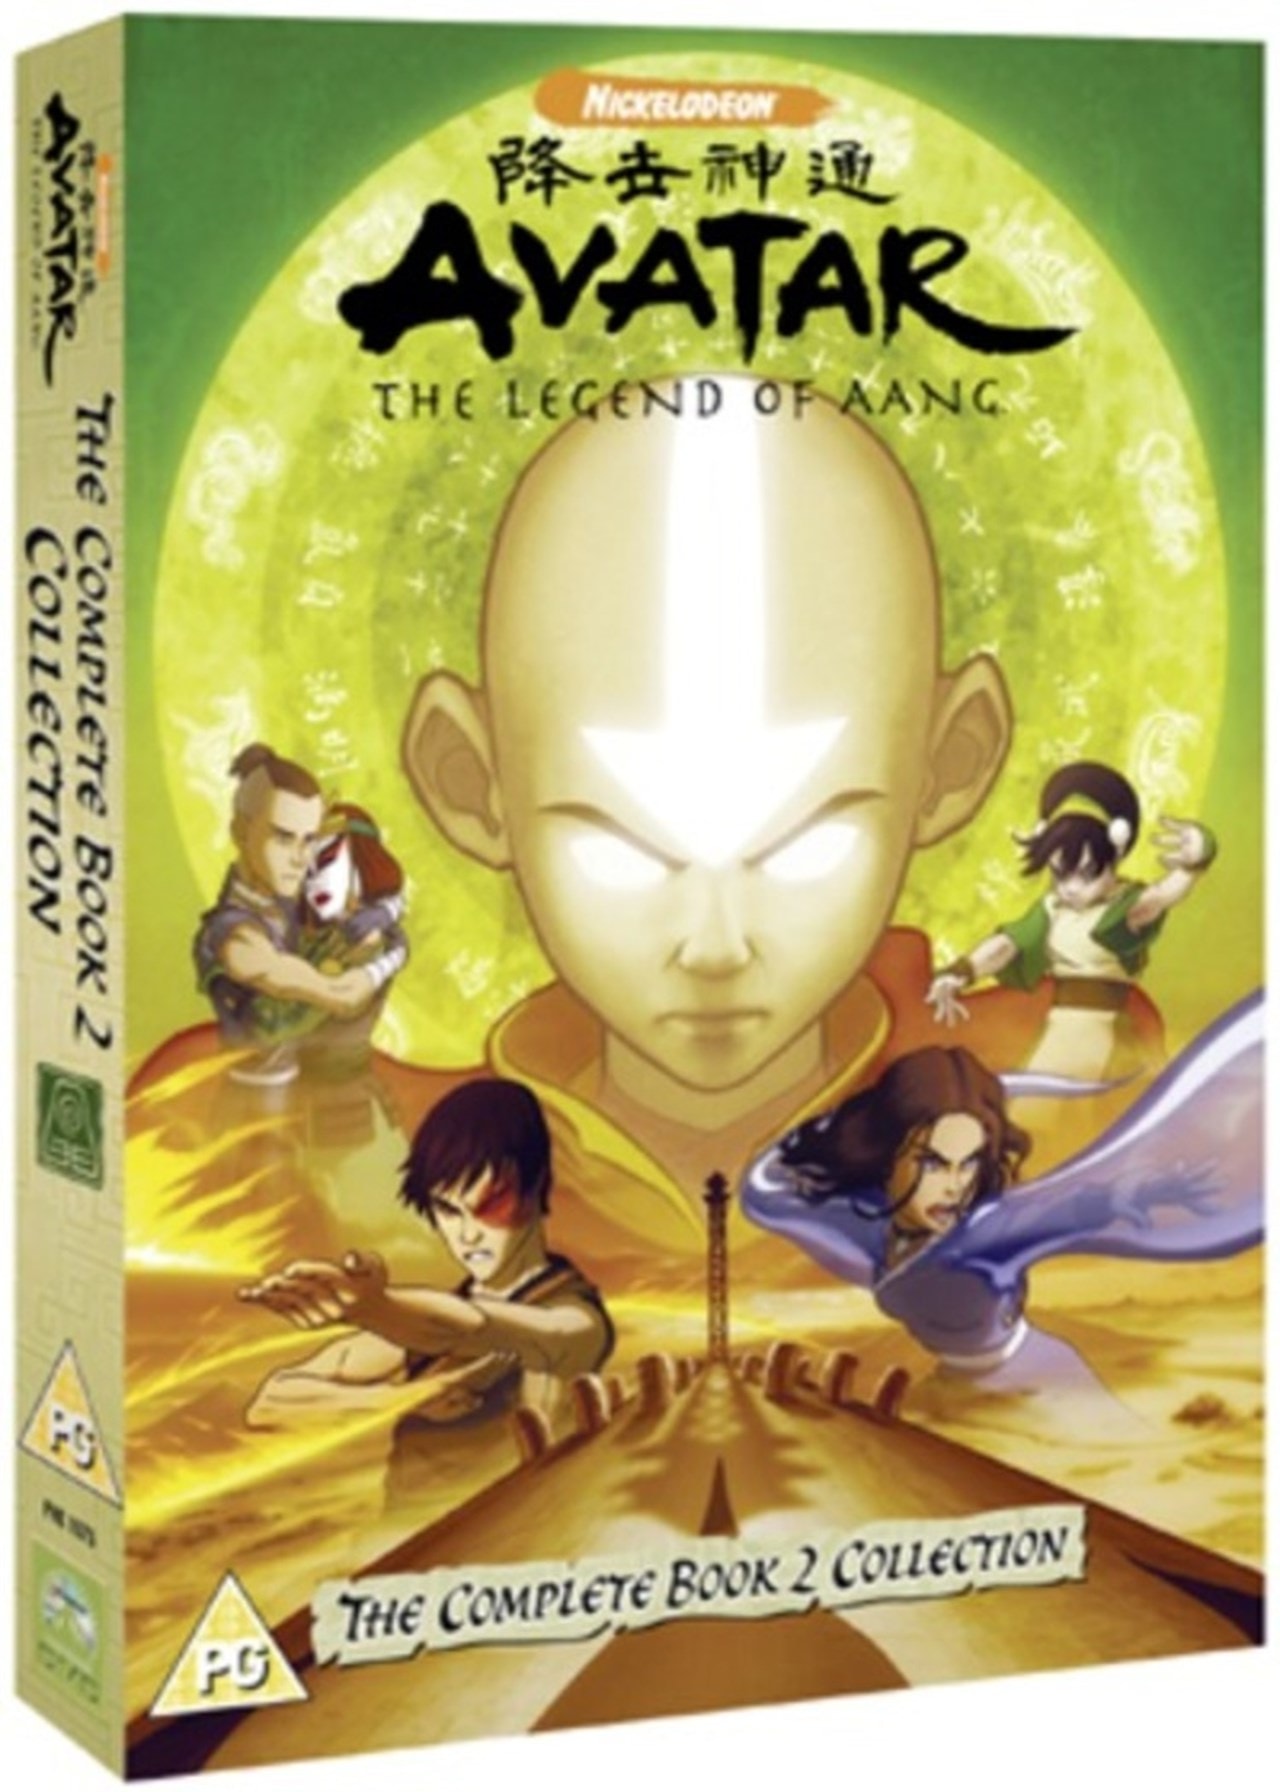 Avatar The Last Airbender The Complete Book 2 Collection Dvd Box